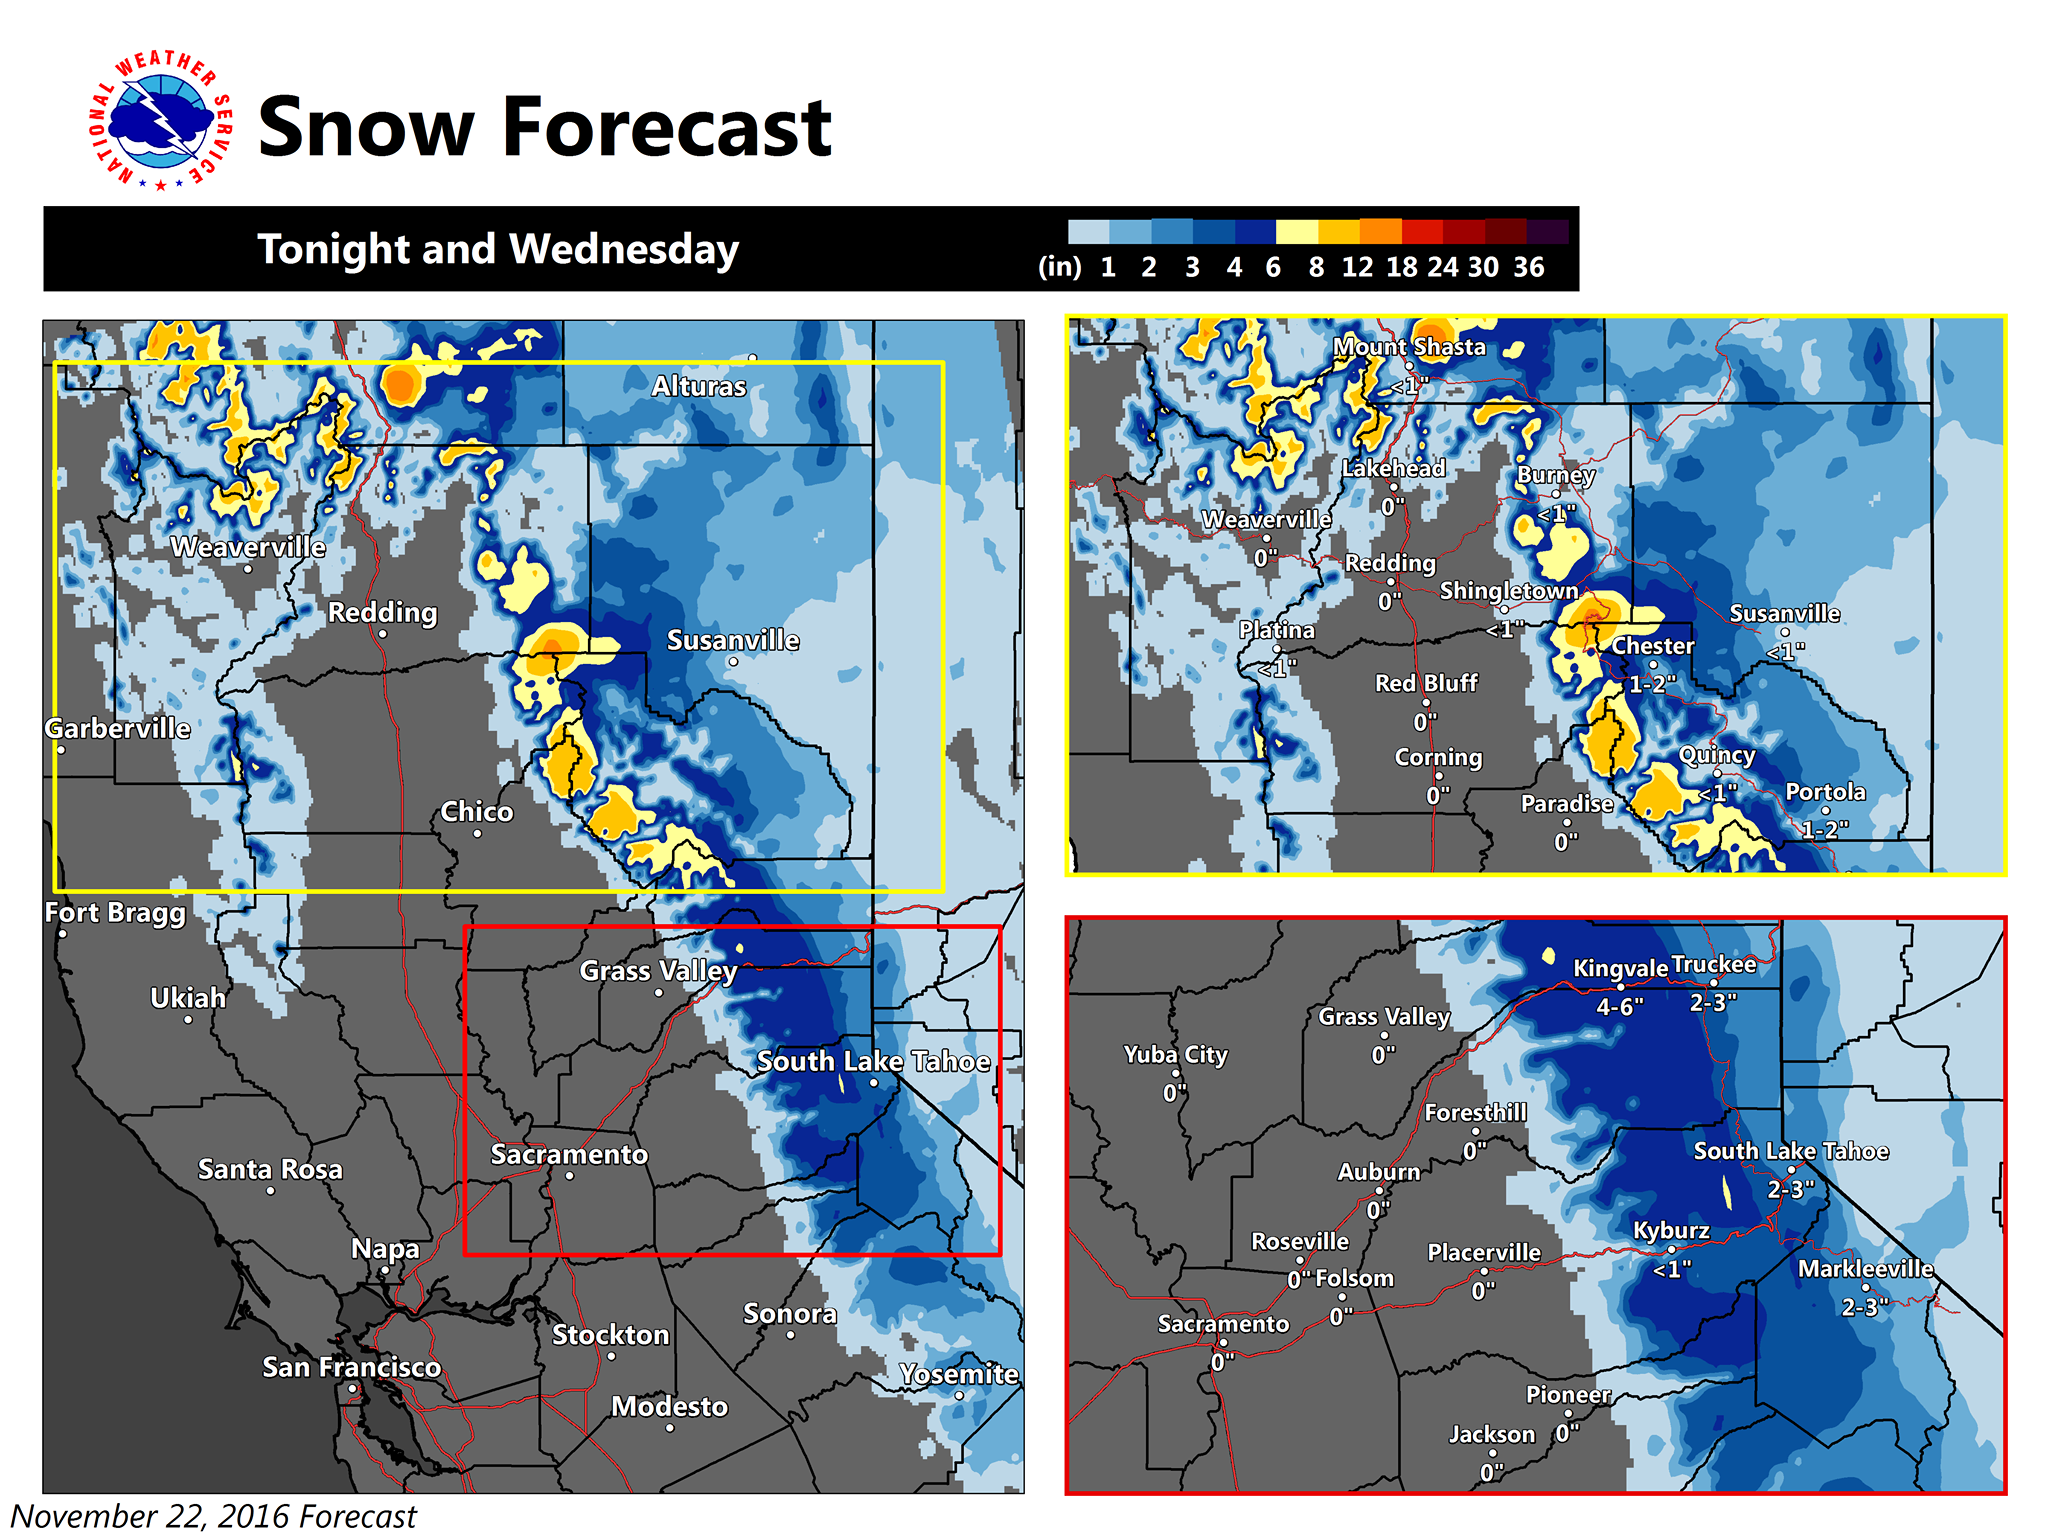 Snowfall forecast map for NorCal looking good. image: noaa, today